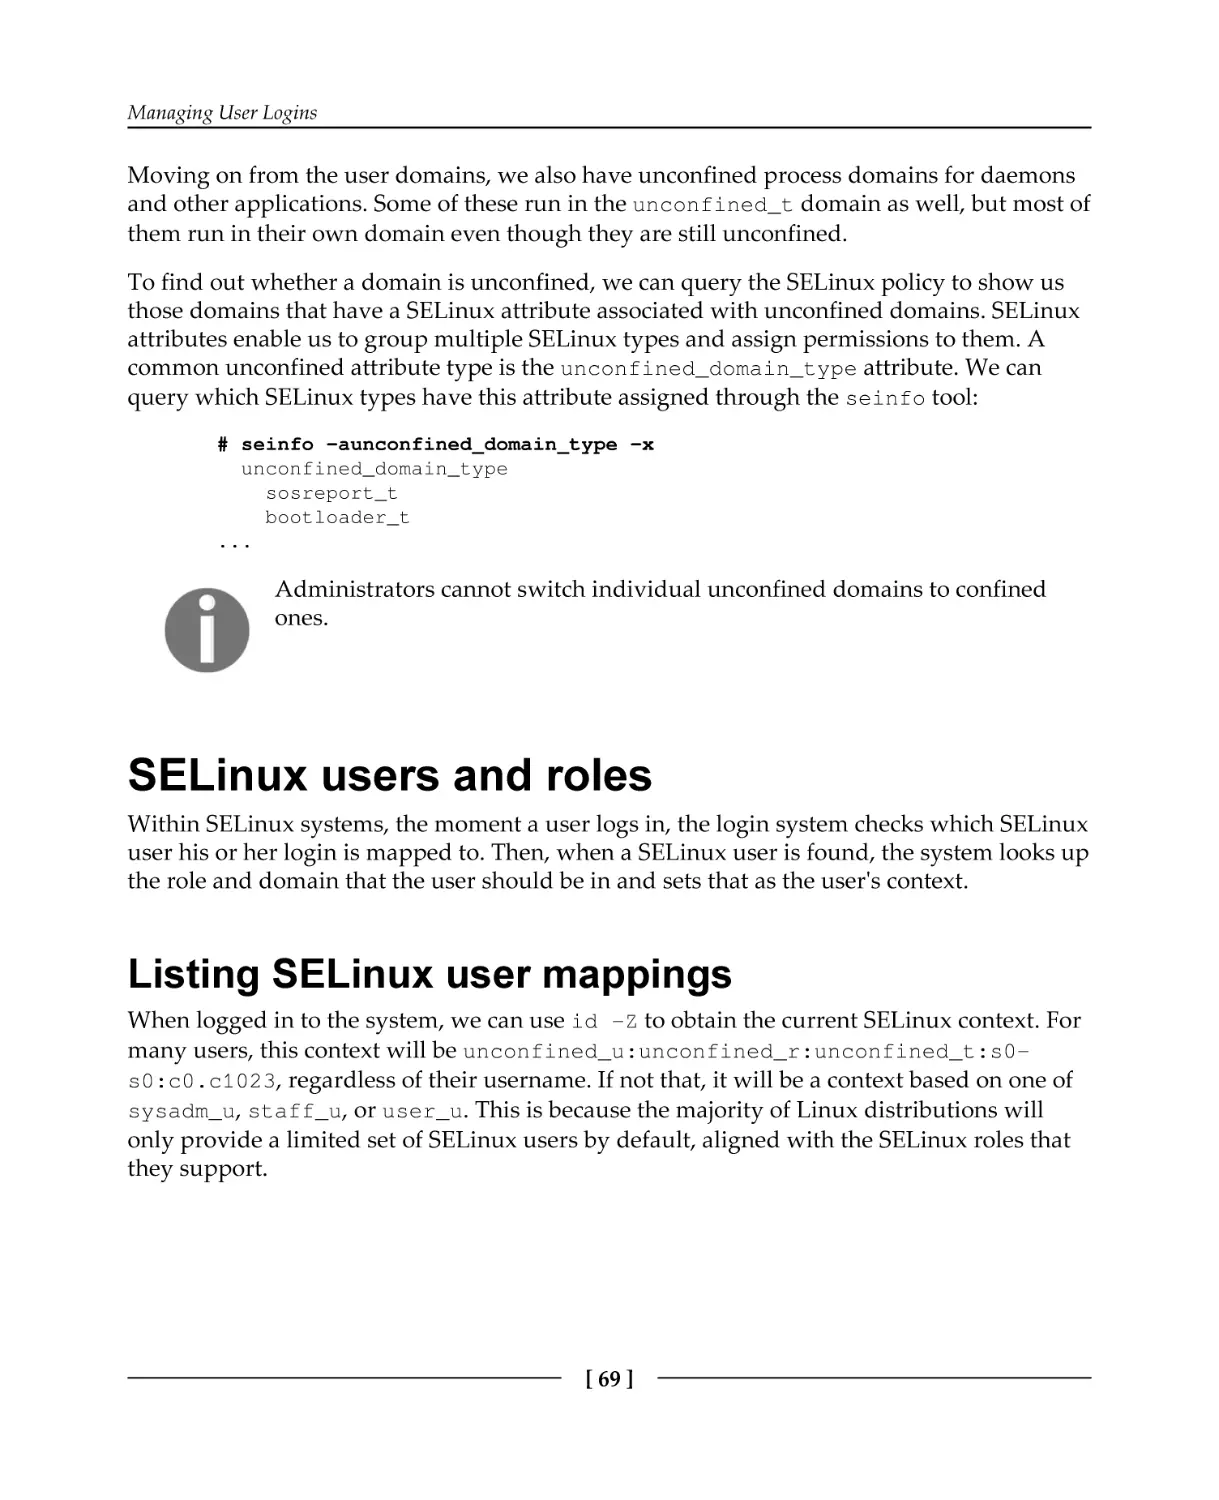 SELinux users and roles
Listing SELinux user mappings